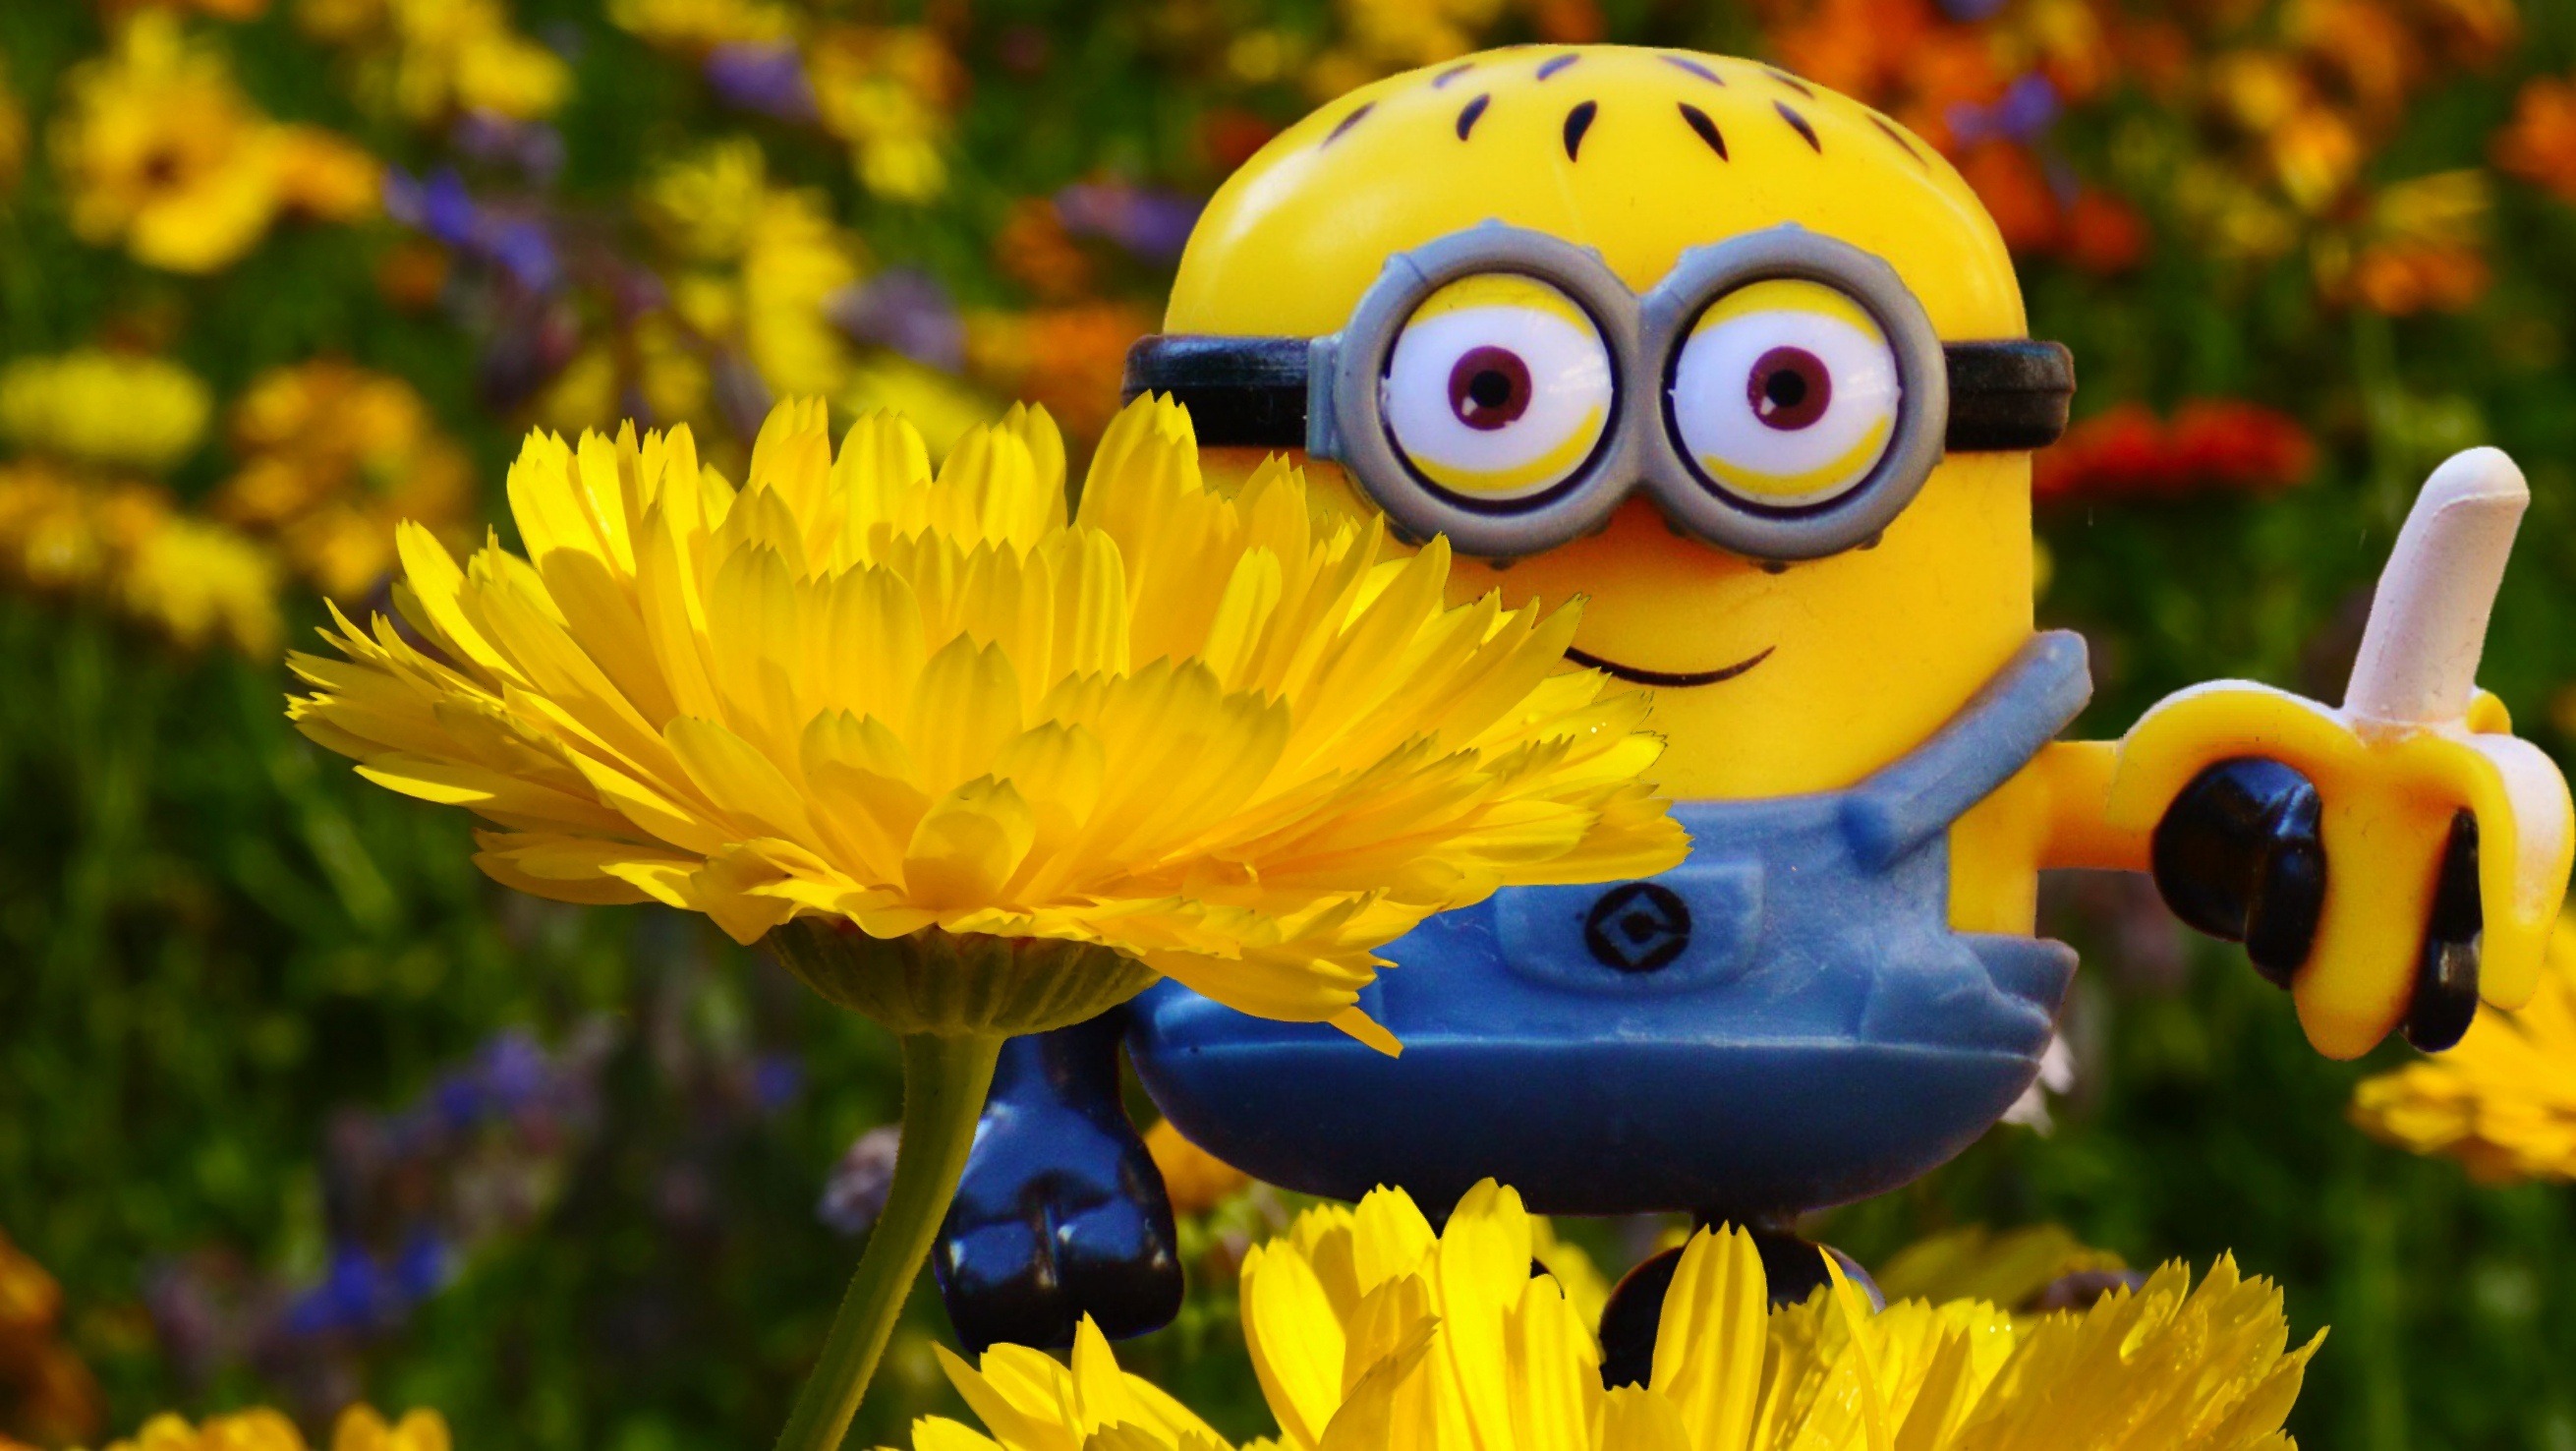 Free Image, grass, meadow, flower, petal, spring, yellow, banana, flora, sunflower, wildflower, flowers, fun, figure, funny, minion, macro photography, flowering plant, daisy family, pollinator, computer wallpaper, membrane winged insect, toy play